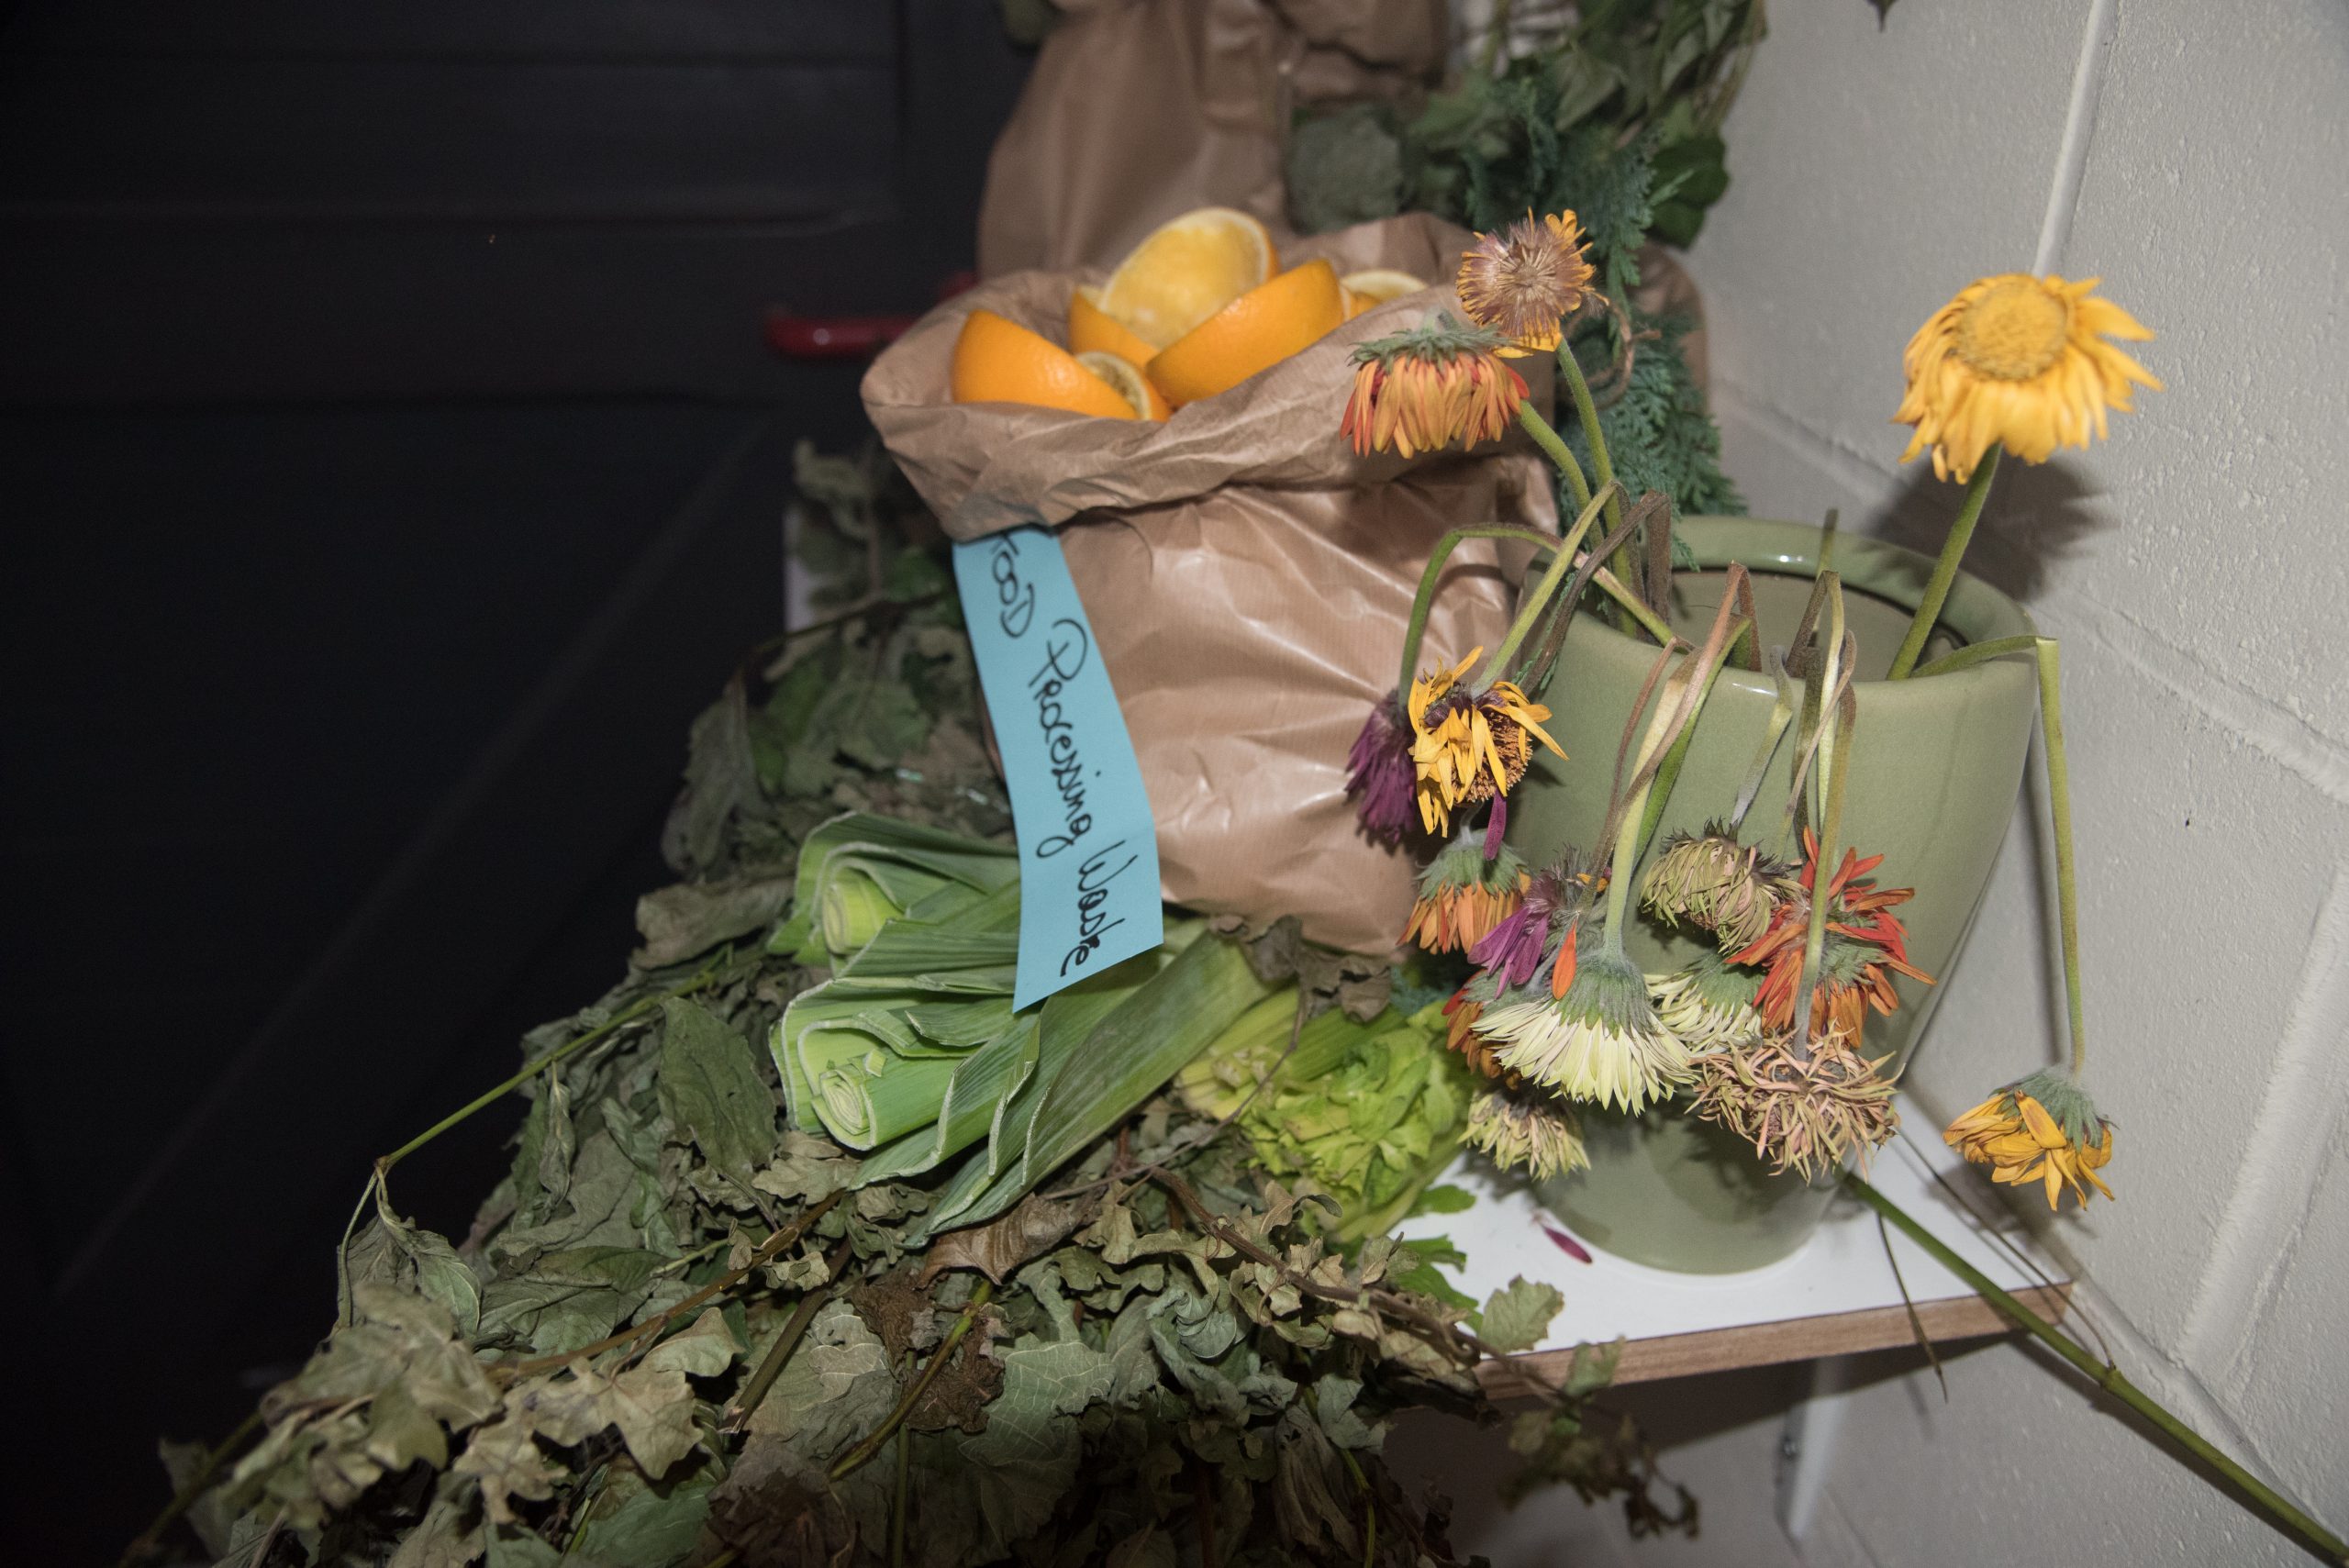 Picture showing orange peels, drying leeks and limp flowers